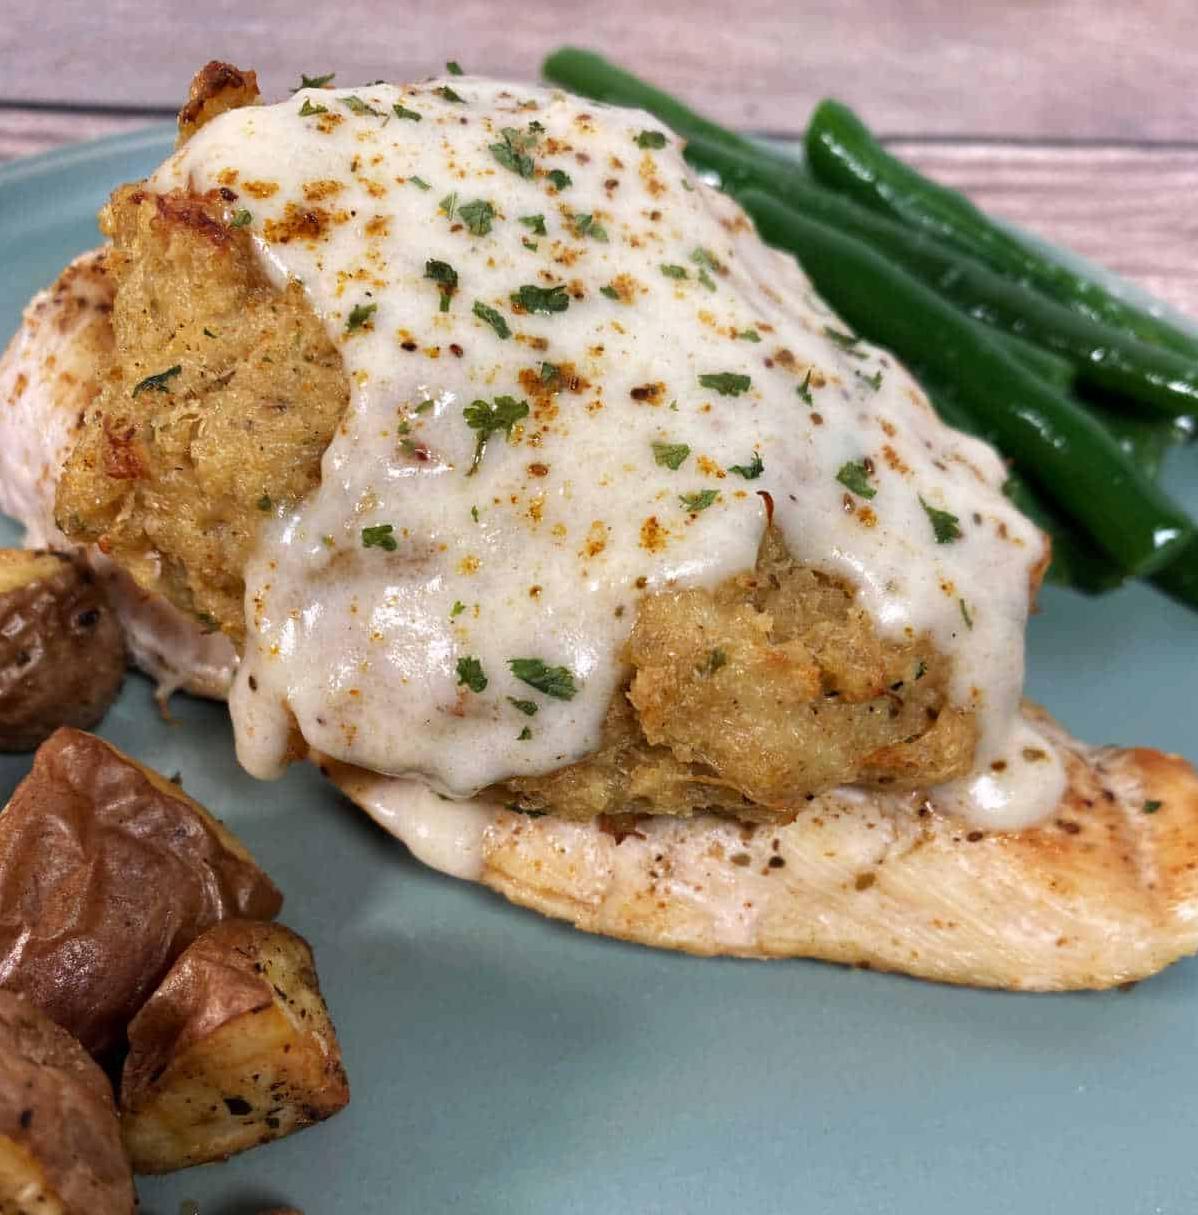  It's time to get clucking with this Chesapeake-inspired chicken dish.